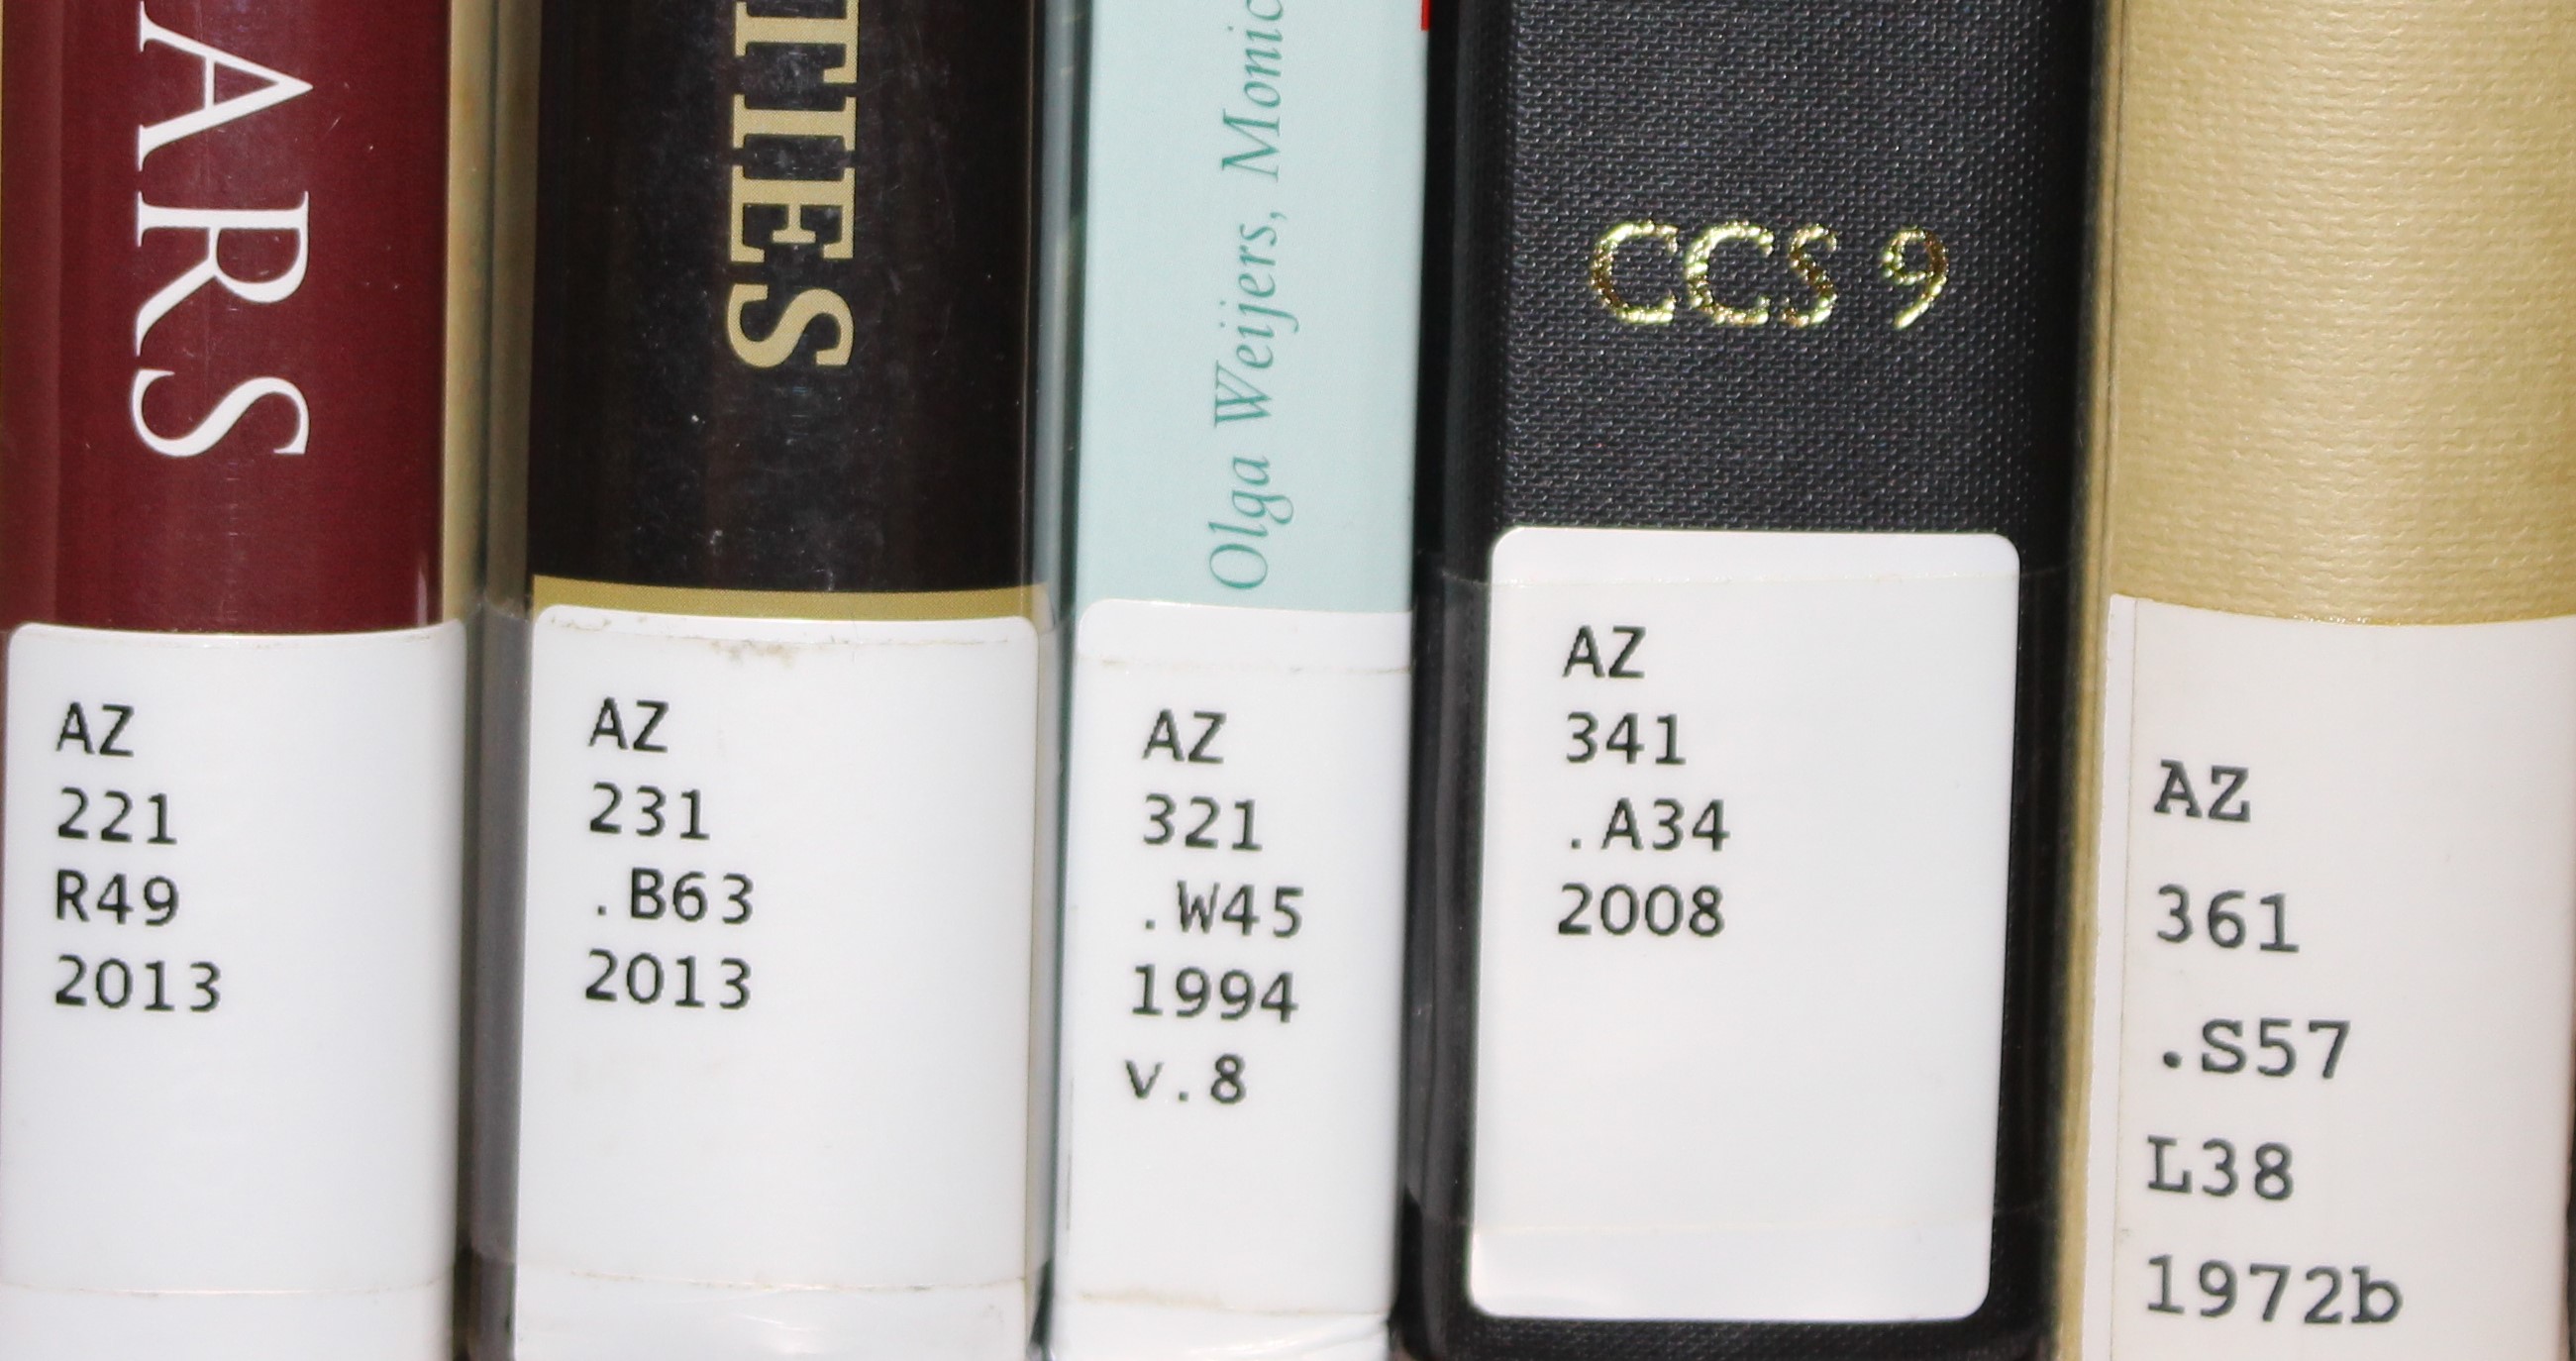 Books in Call Number order based on the second line